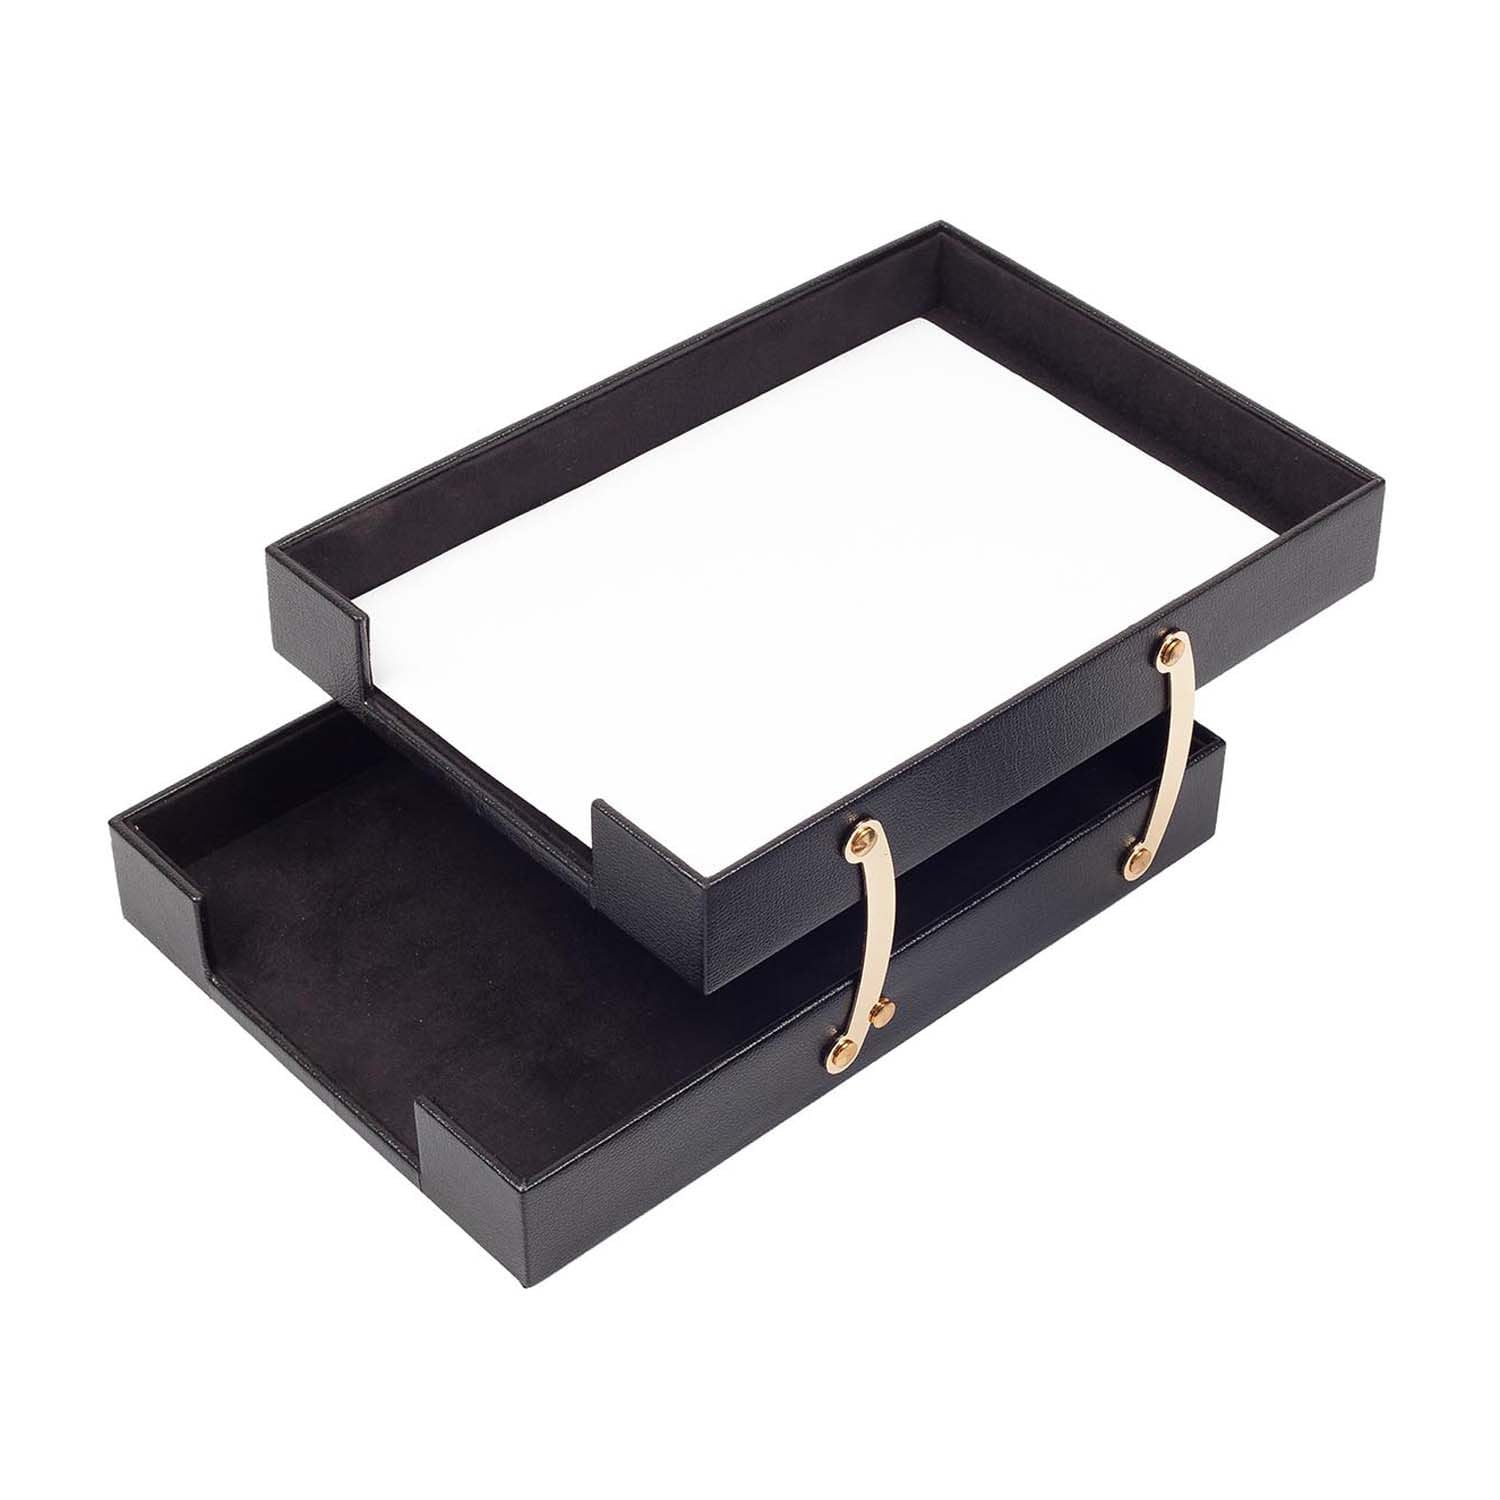 Leather Document Tray Double-Desk Organizer-Office Accessories-Desk Accessories-Office Supplies-Office Organiz